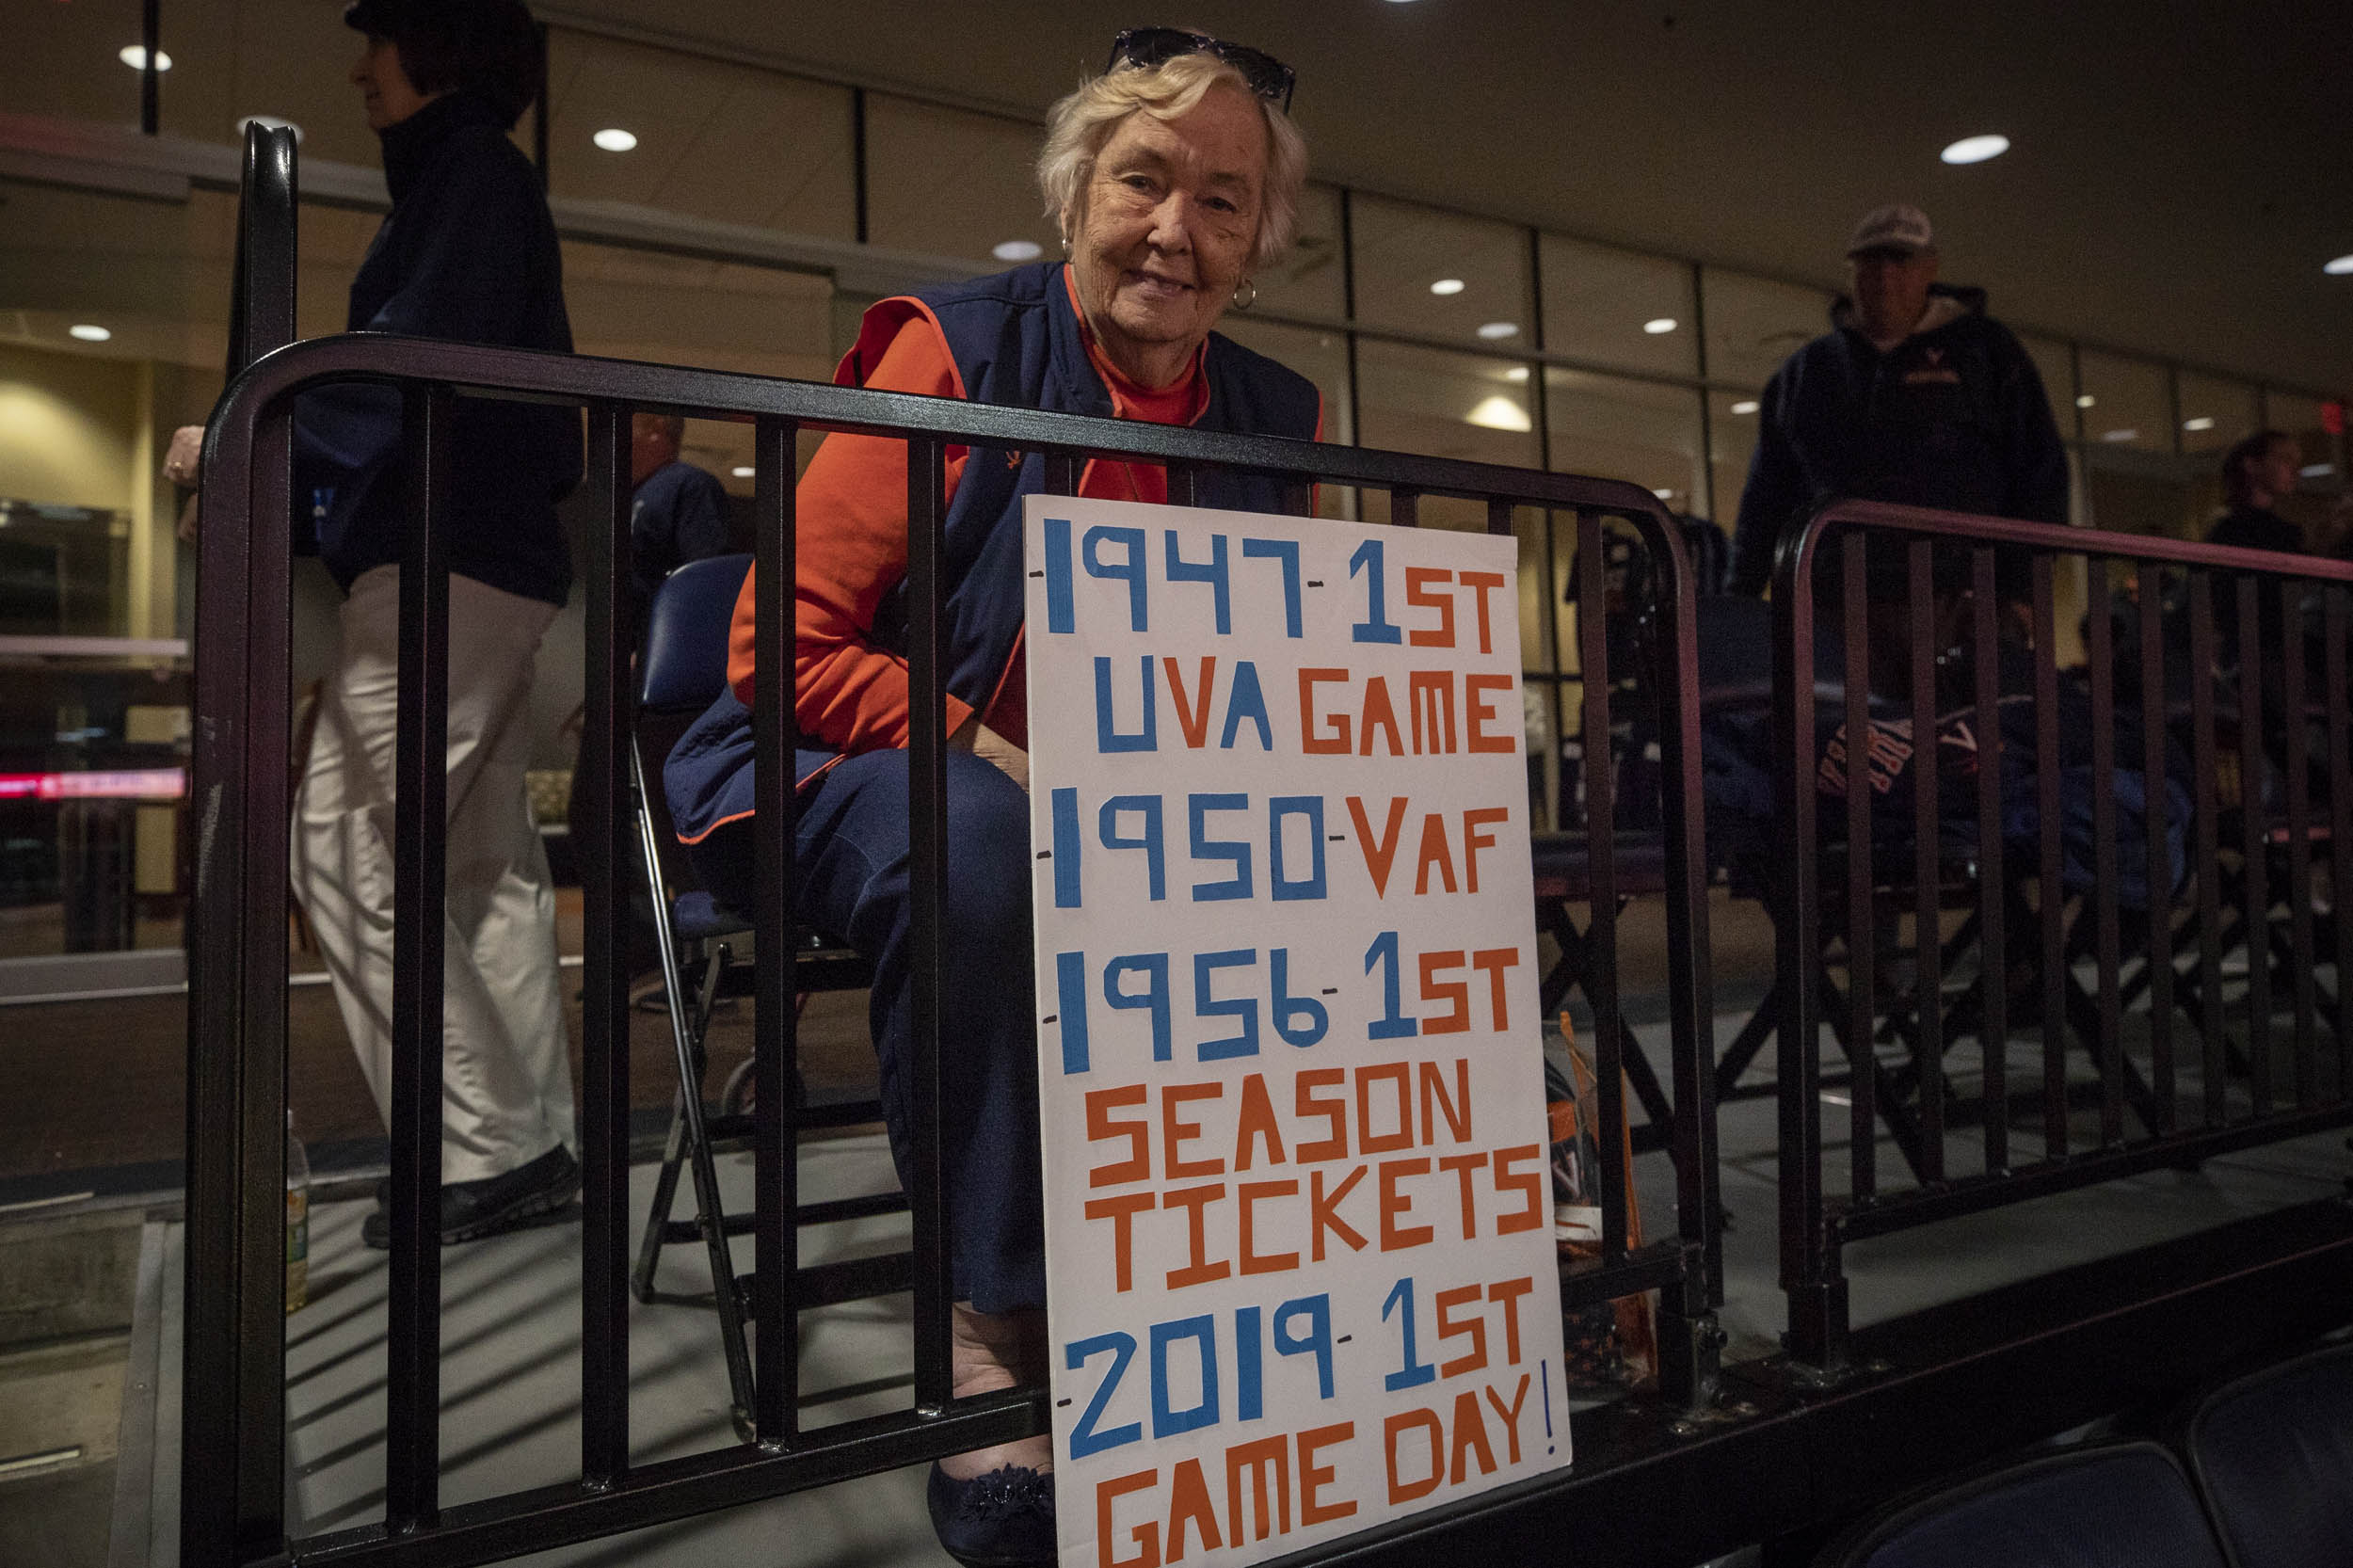 Woman holding a sign that says: 1947 - 1st live game 1950 - VAF 1956 - 1st season tickets 2019 - 1st game day!